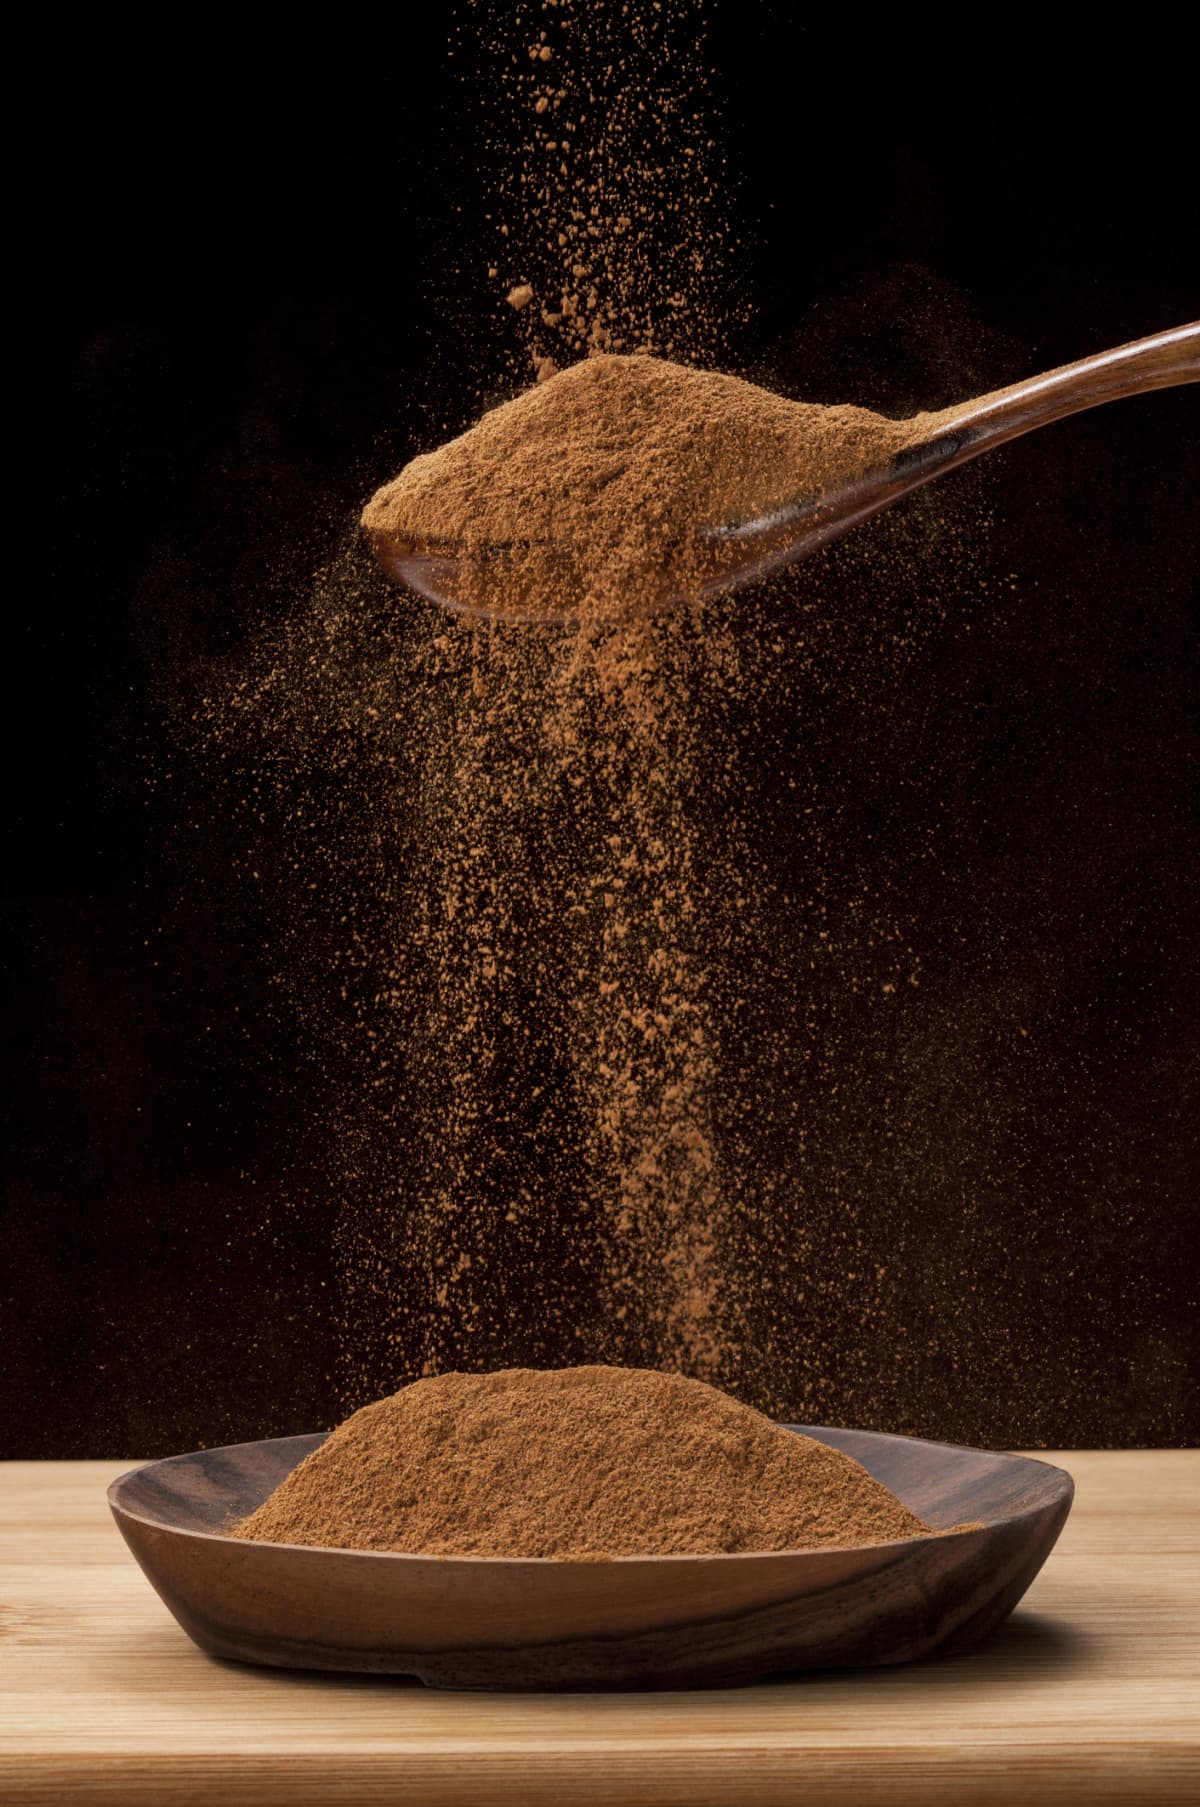 Cinnamon being sprinkled from a spoon.